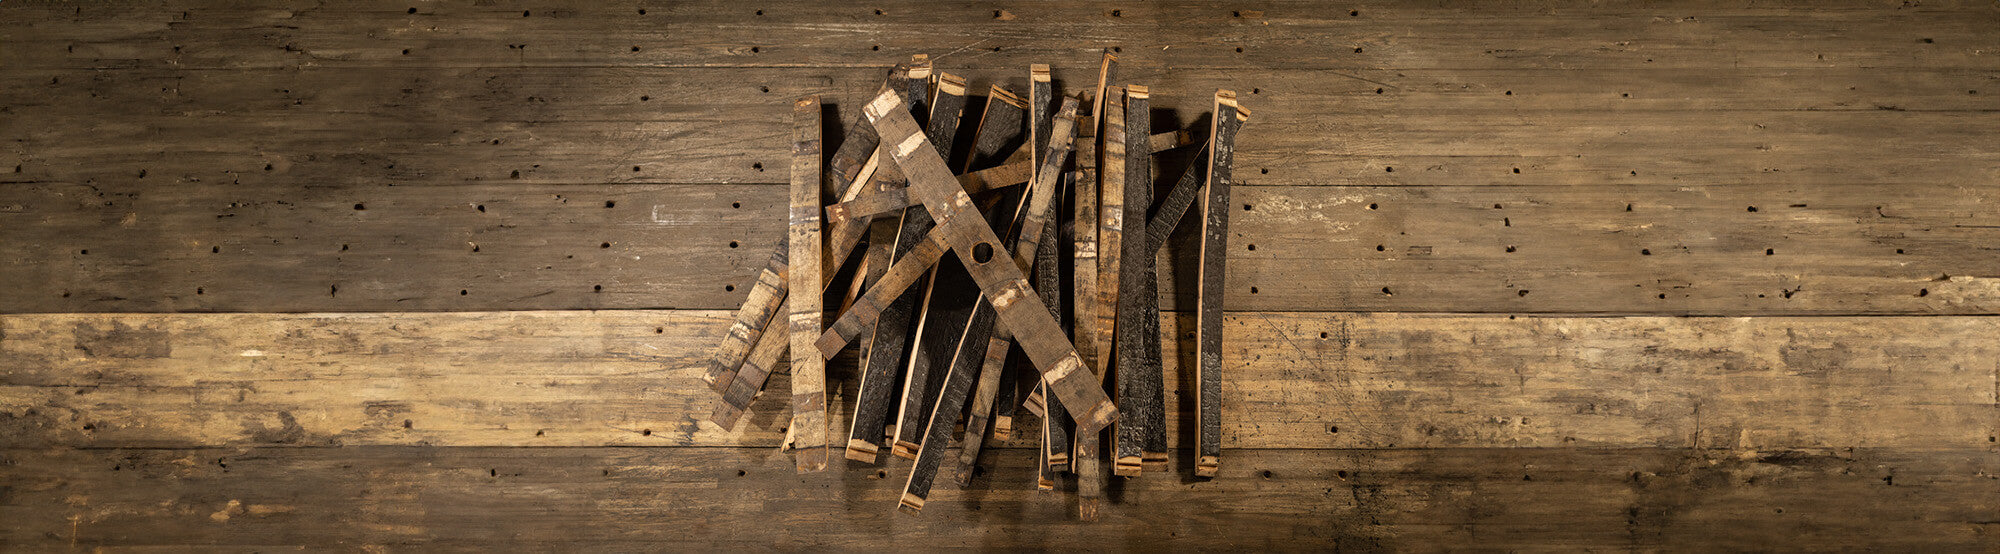 Pile of staves from a whiskey barrel with bunghole stave on top